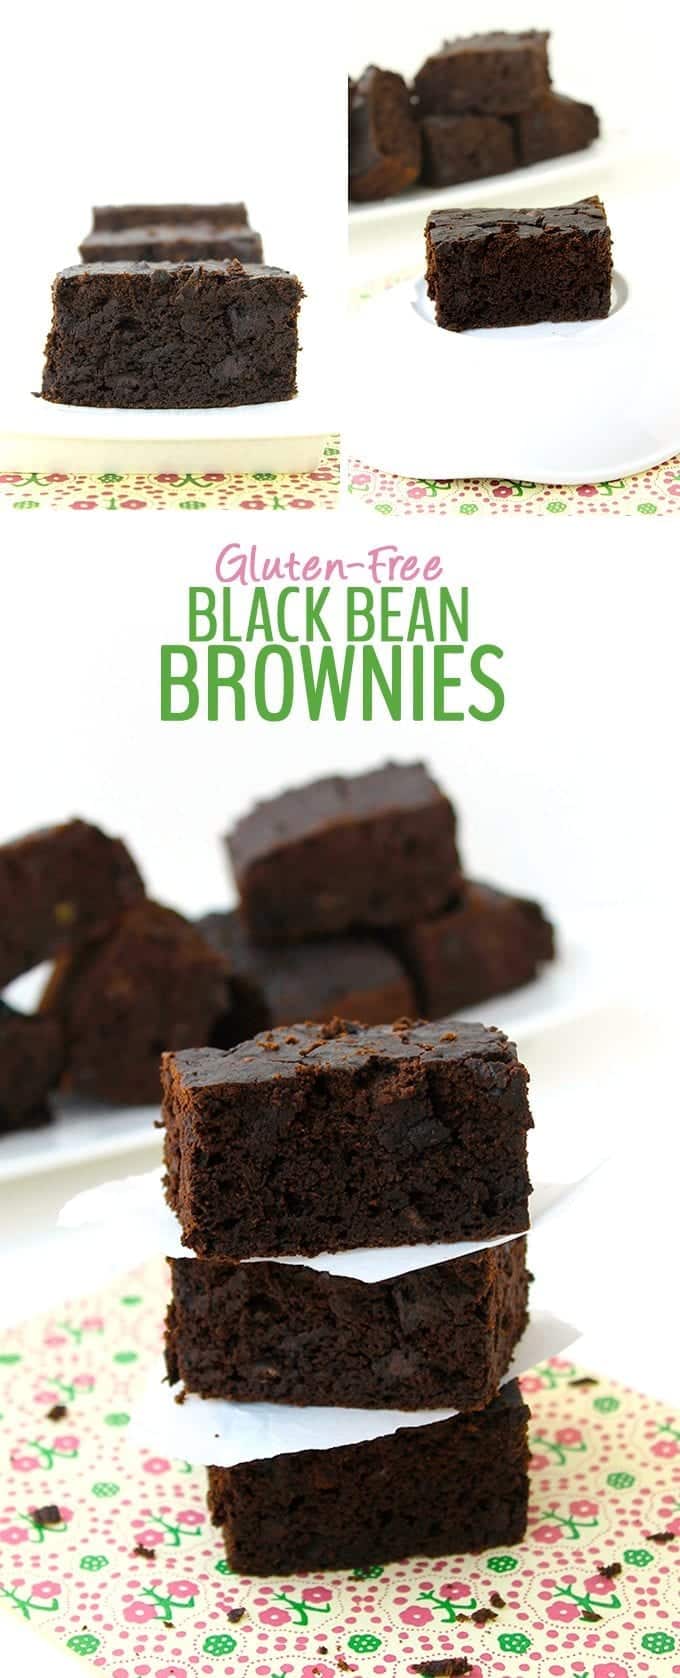 No one needs to know there's black beans hidden in these delicious Gluten-Free Black Bean Brownies. There's also another secret veggie in there and are lightened-up with just 2 tablespoons of coconut oil. A healthy alternative to typical brownie recipes!